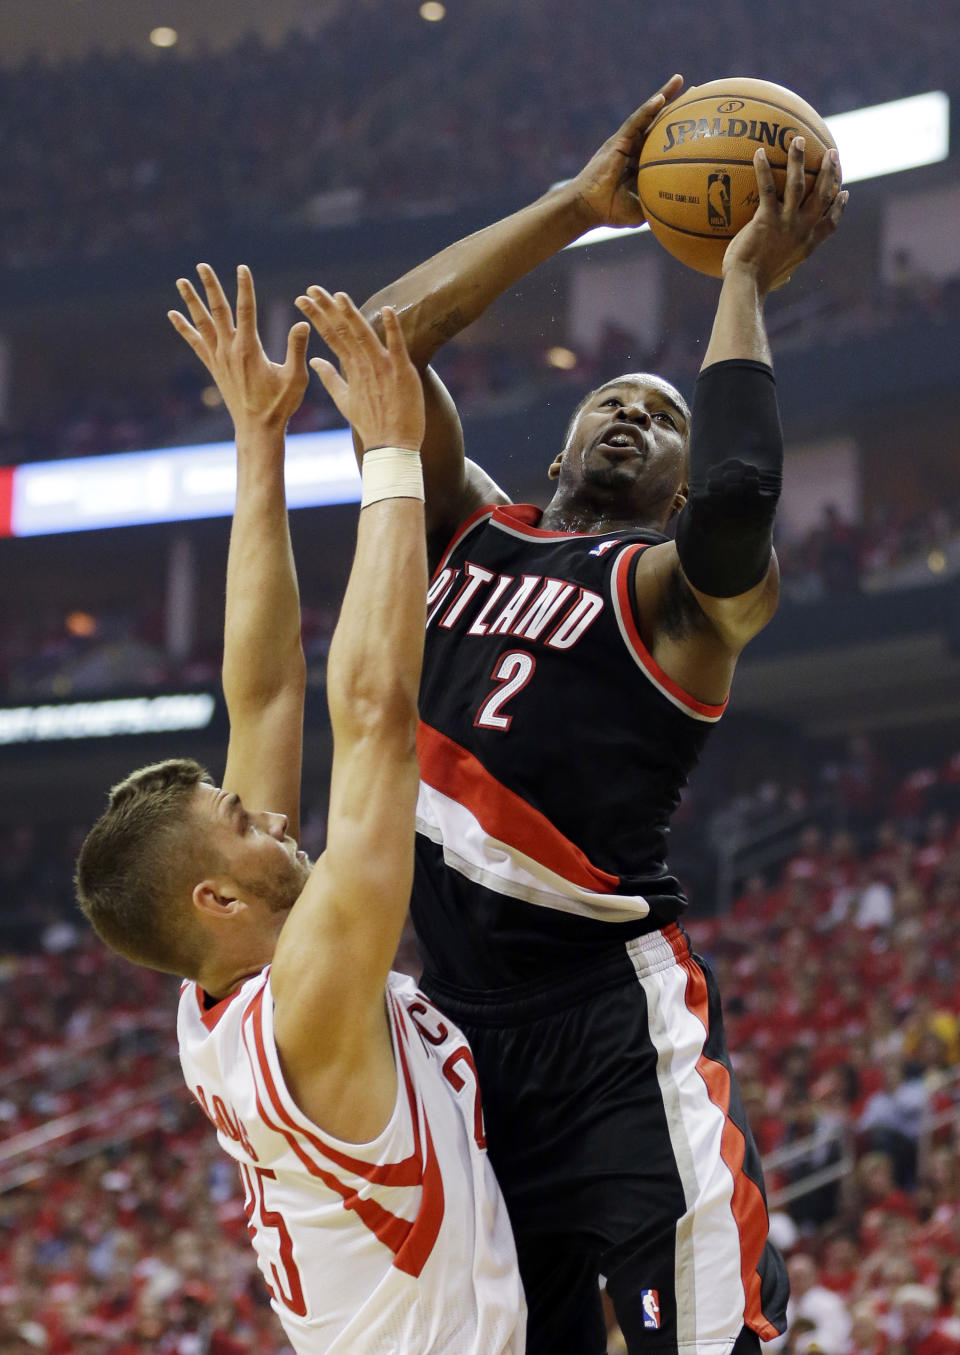 Portland Trail Blazers' Wesley Matthews (2) shoots over Houston Rockets' Chandler Parsons during the first half in Game 1 of an opening-round NBA basketball playoff series, Sunday, April 20, 2014, in Houston. (AP Photo/David J. Phillip)